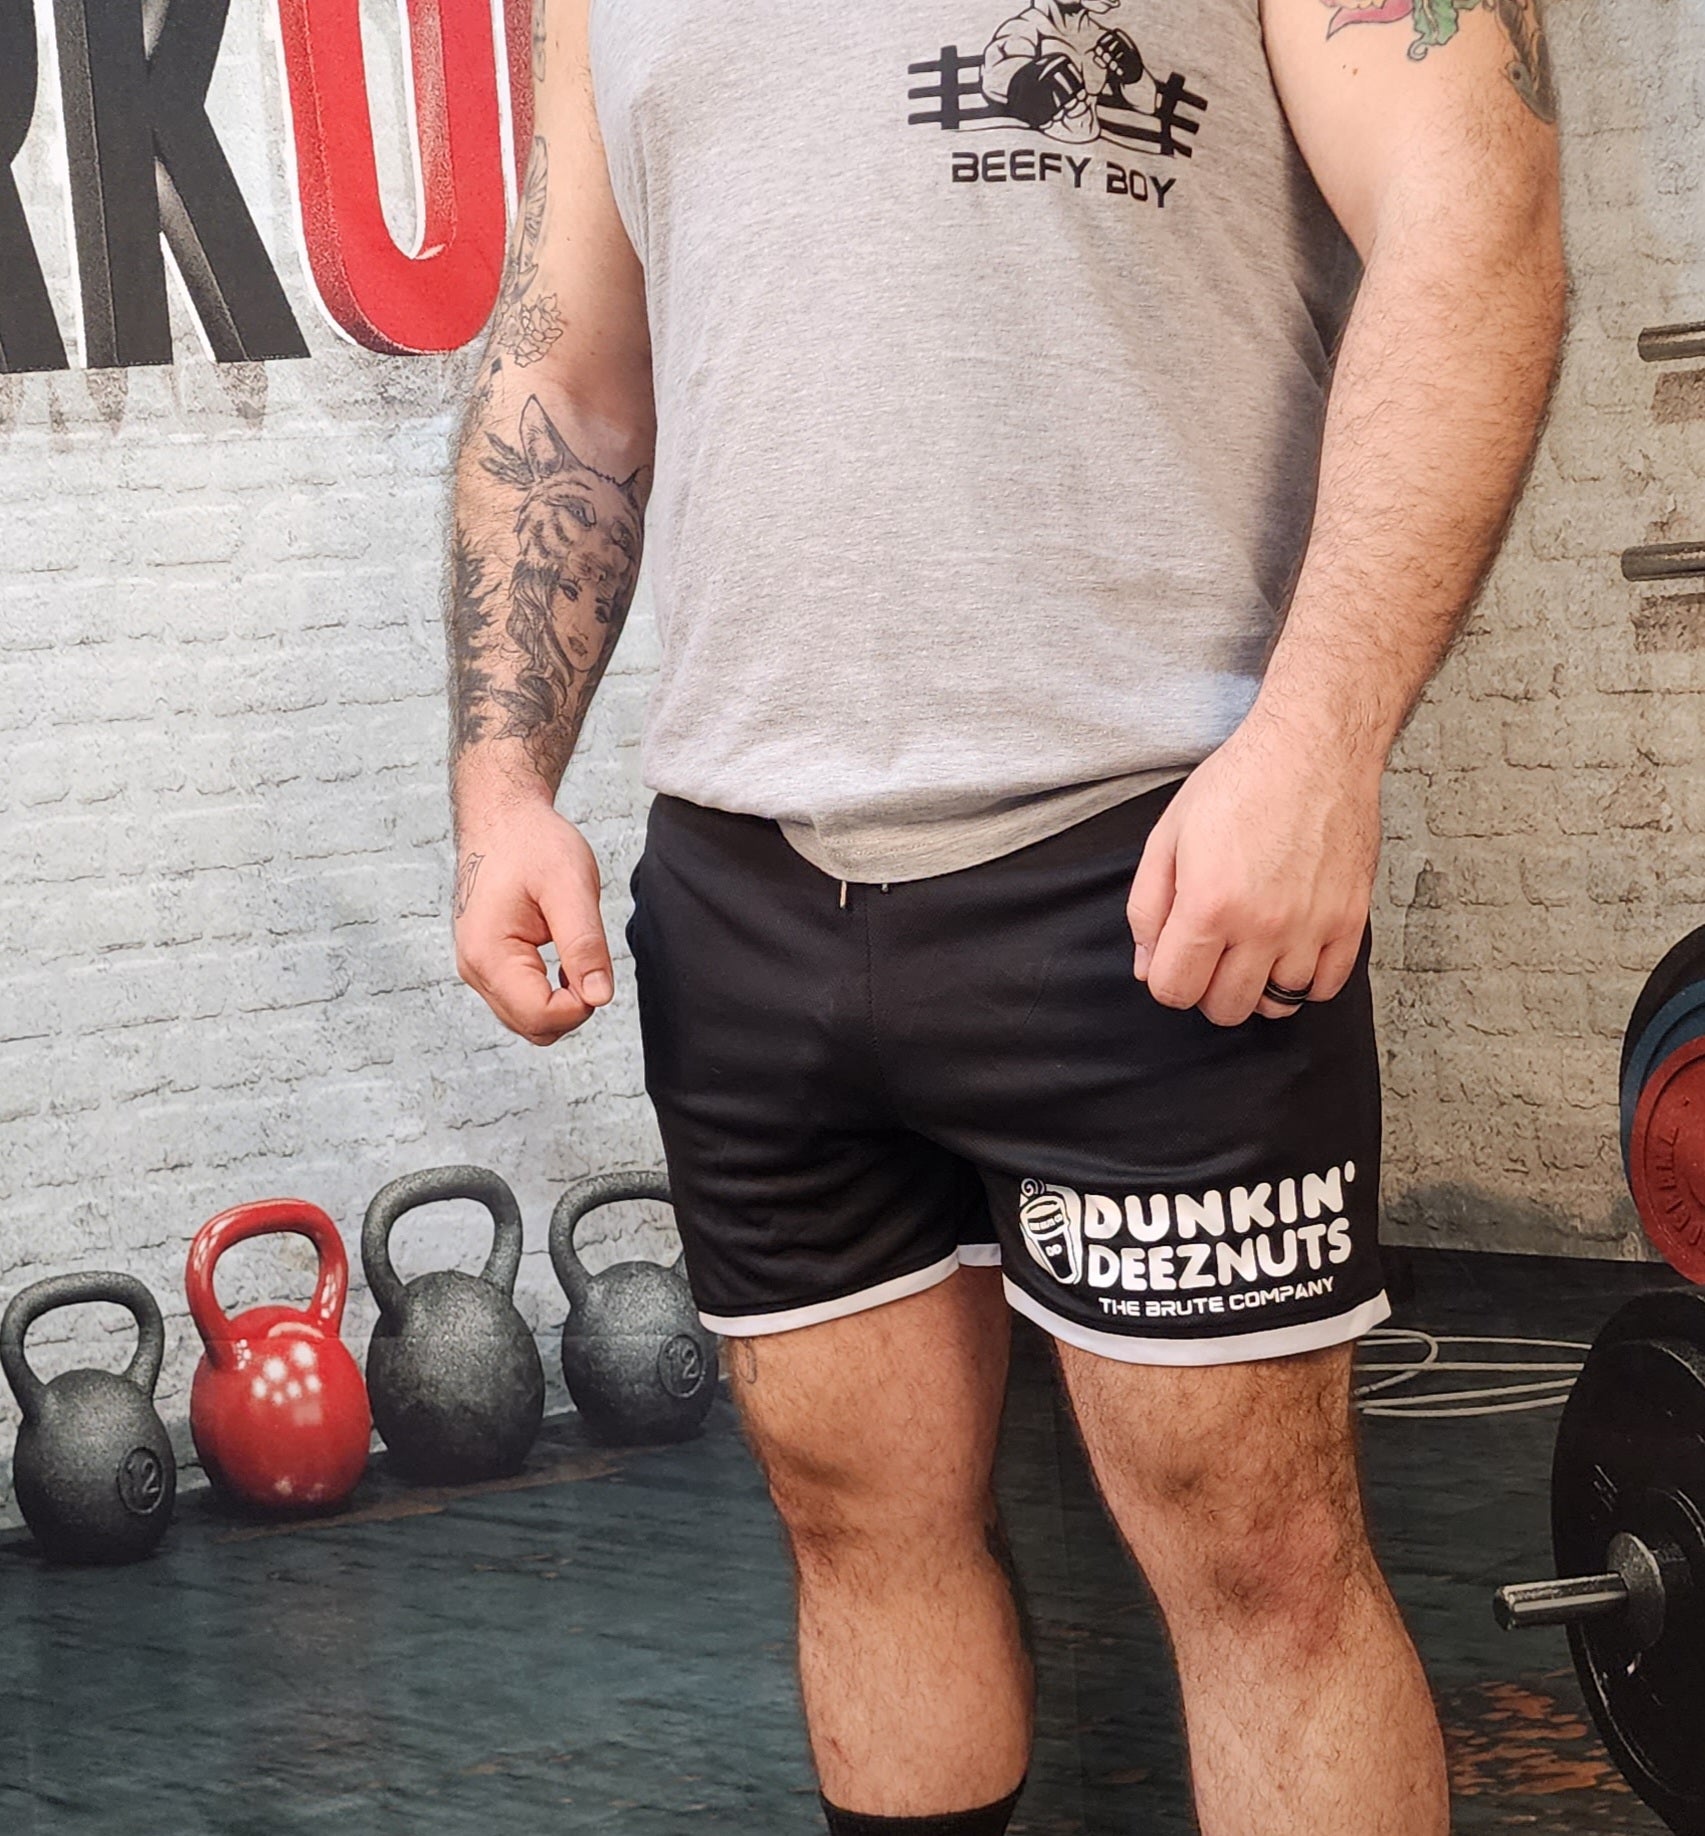 Brute Co. All You Can Eat Lifting Shorts – The Brute Company